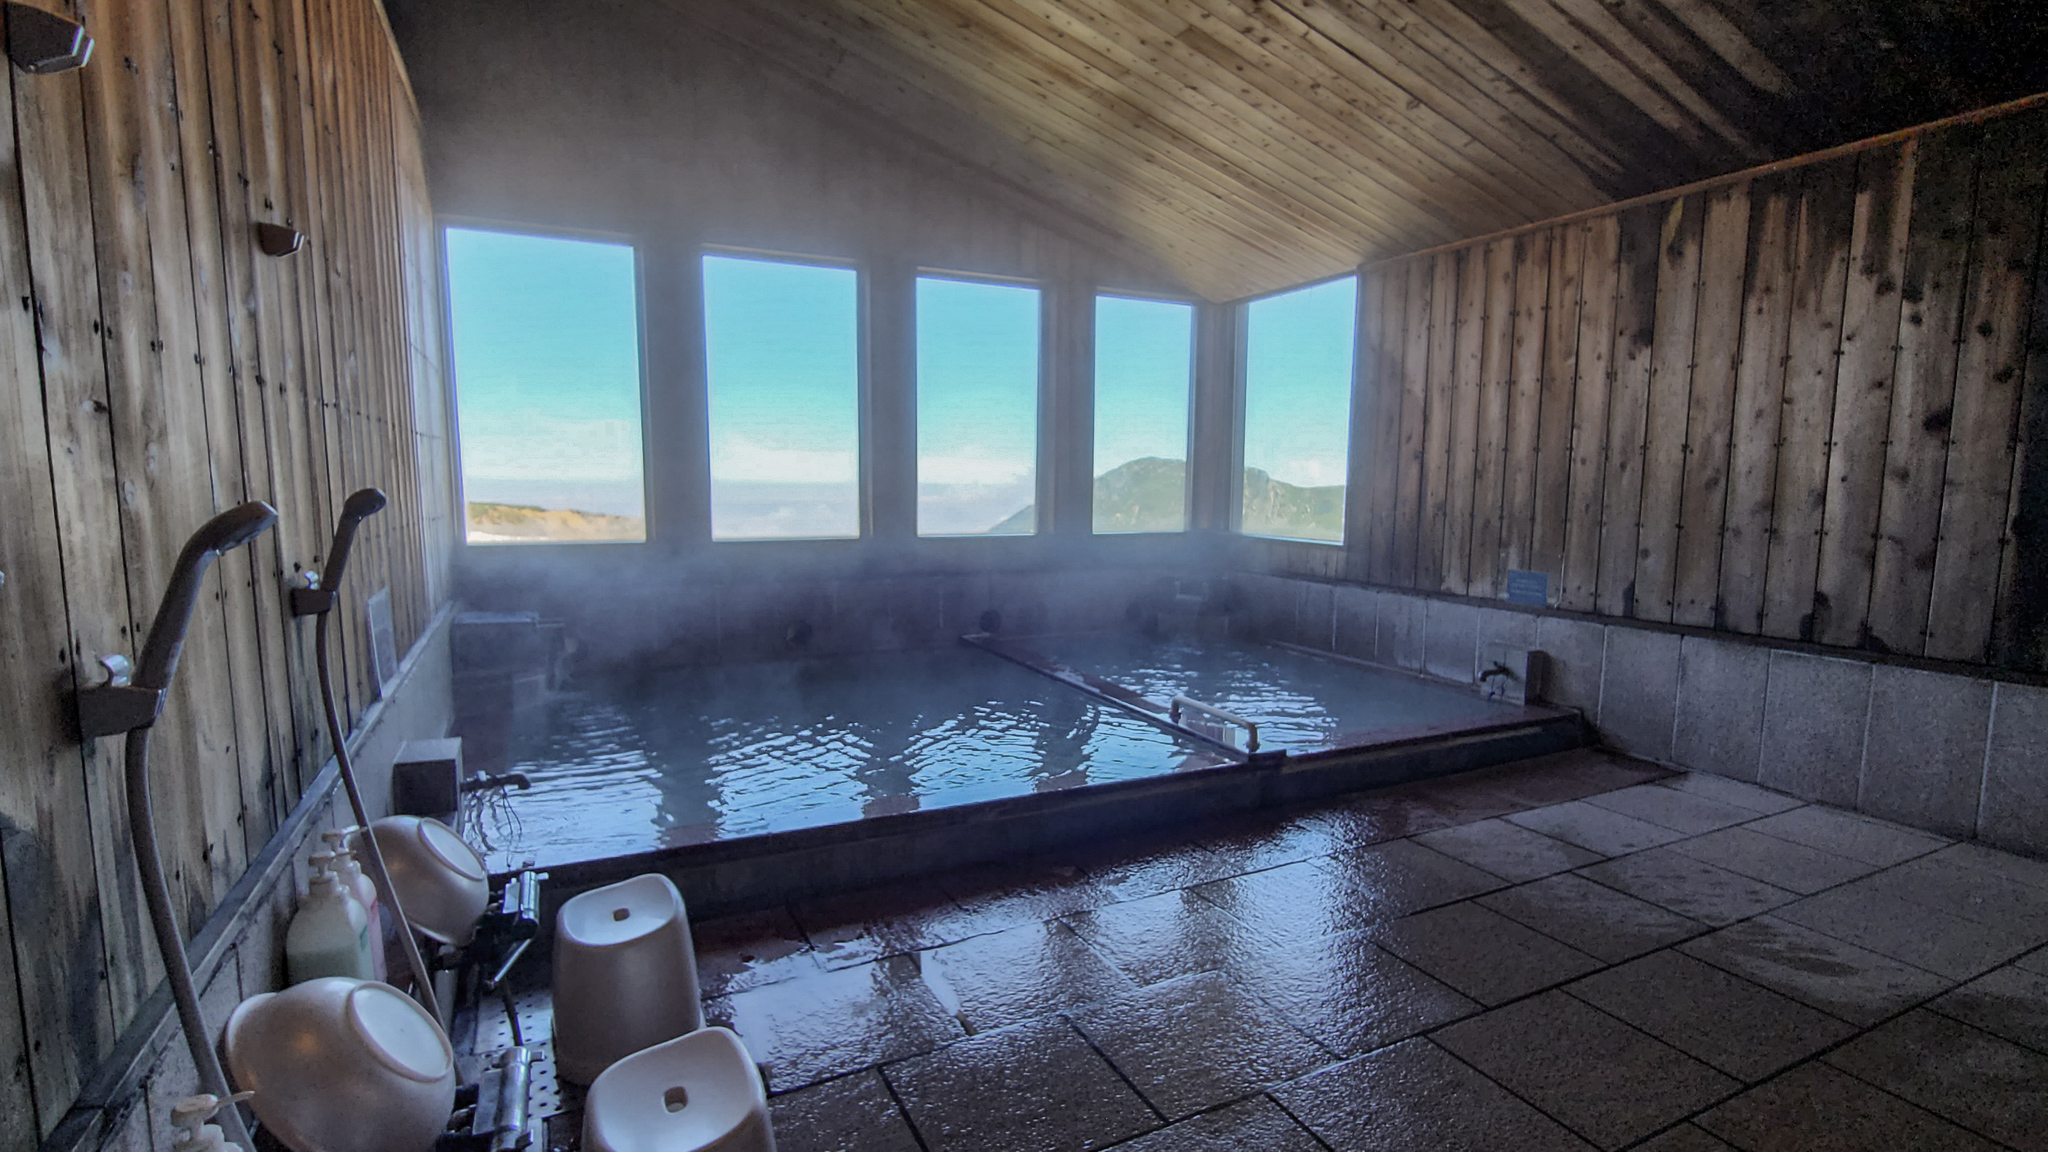 The highest Onsen in Japan